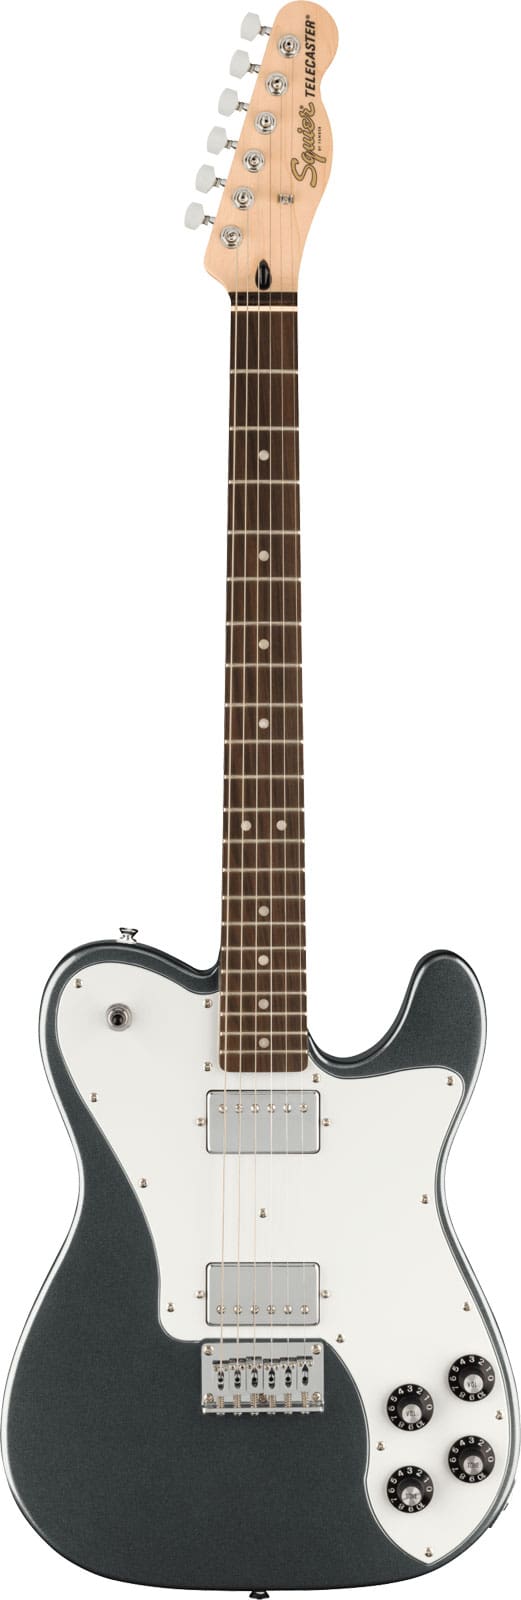 SQUIER TELECASTER DELUXE AFFINITY LRL CHARCOAL FROST METALLIC